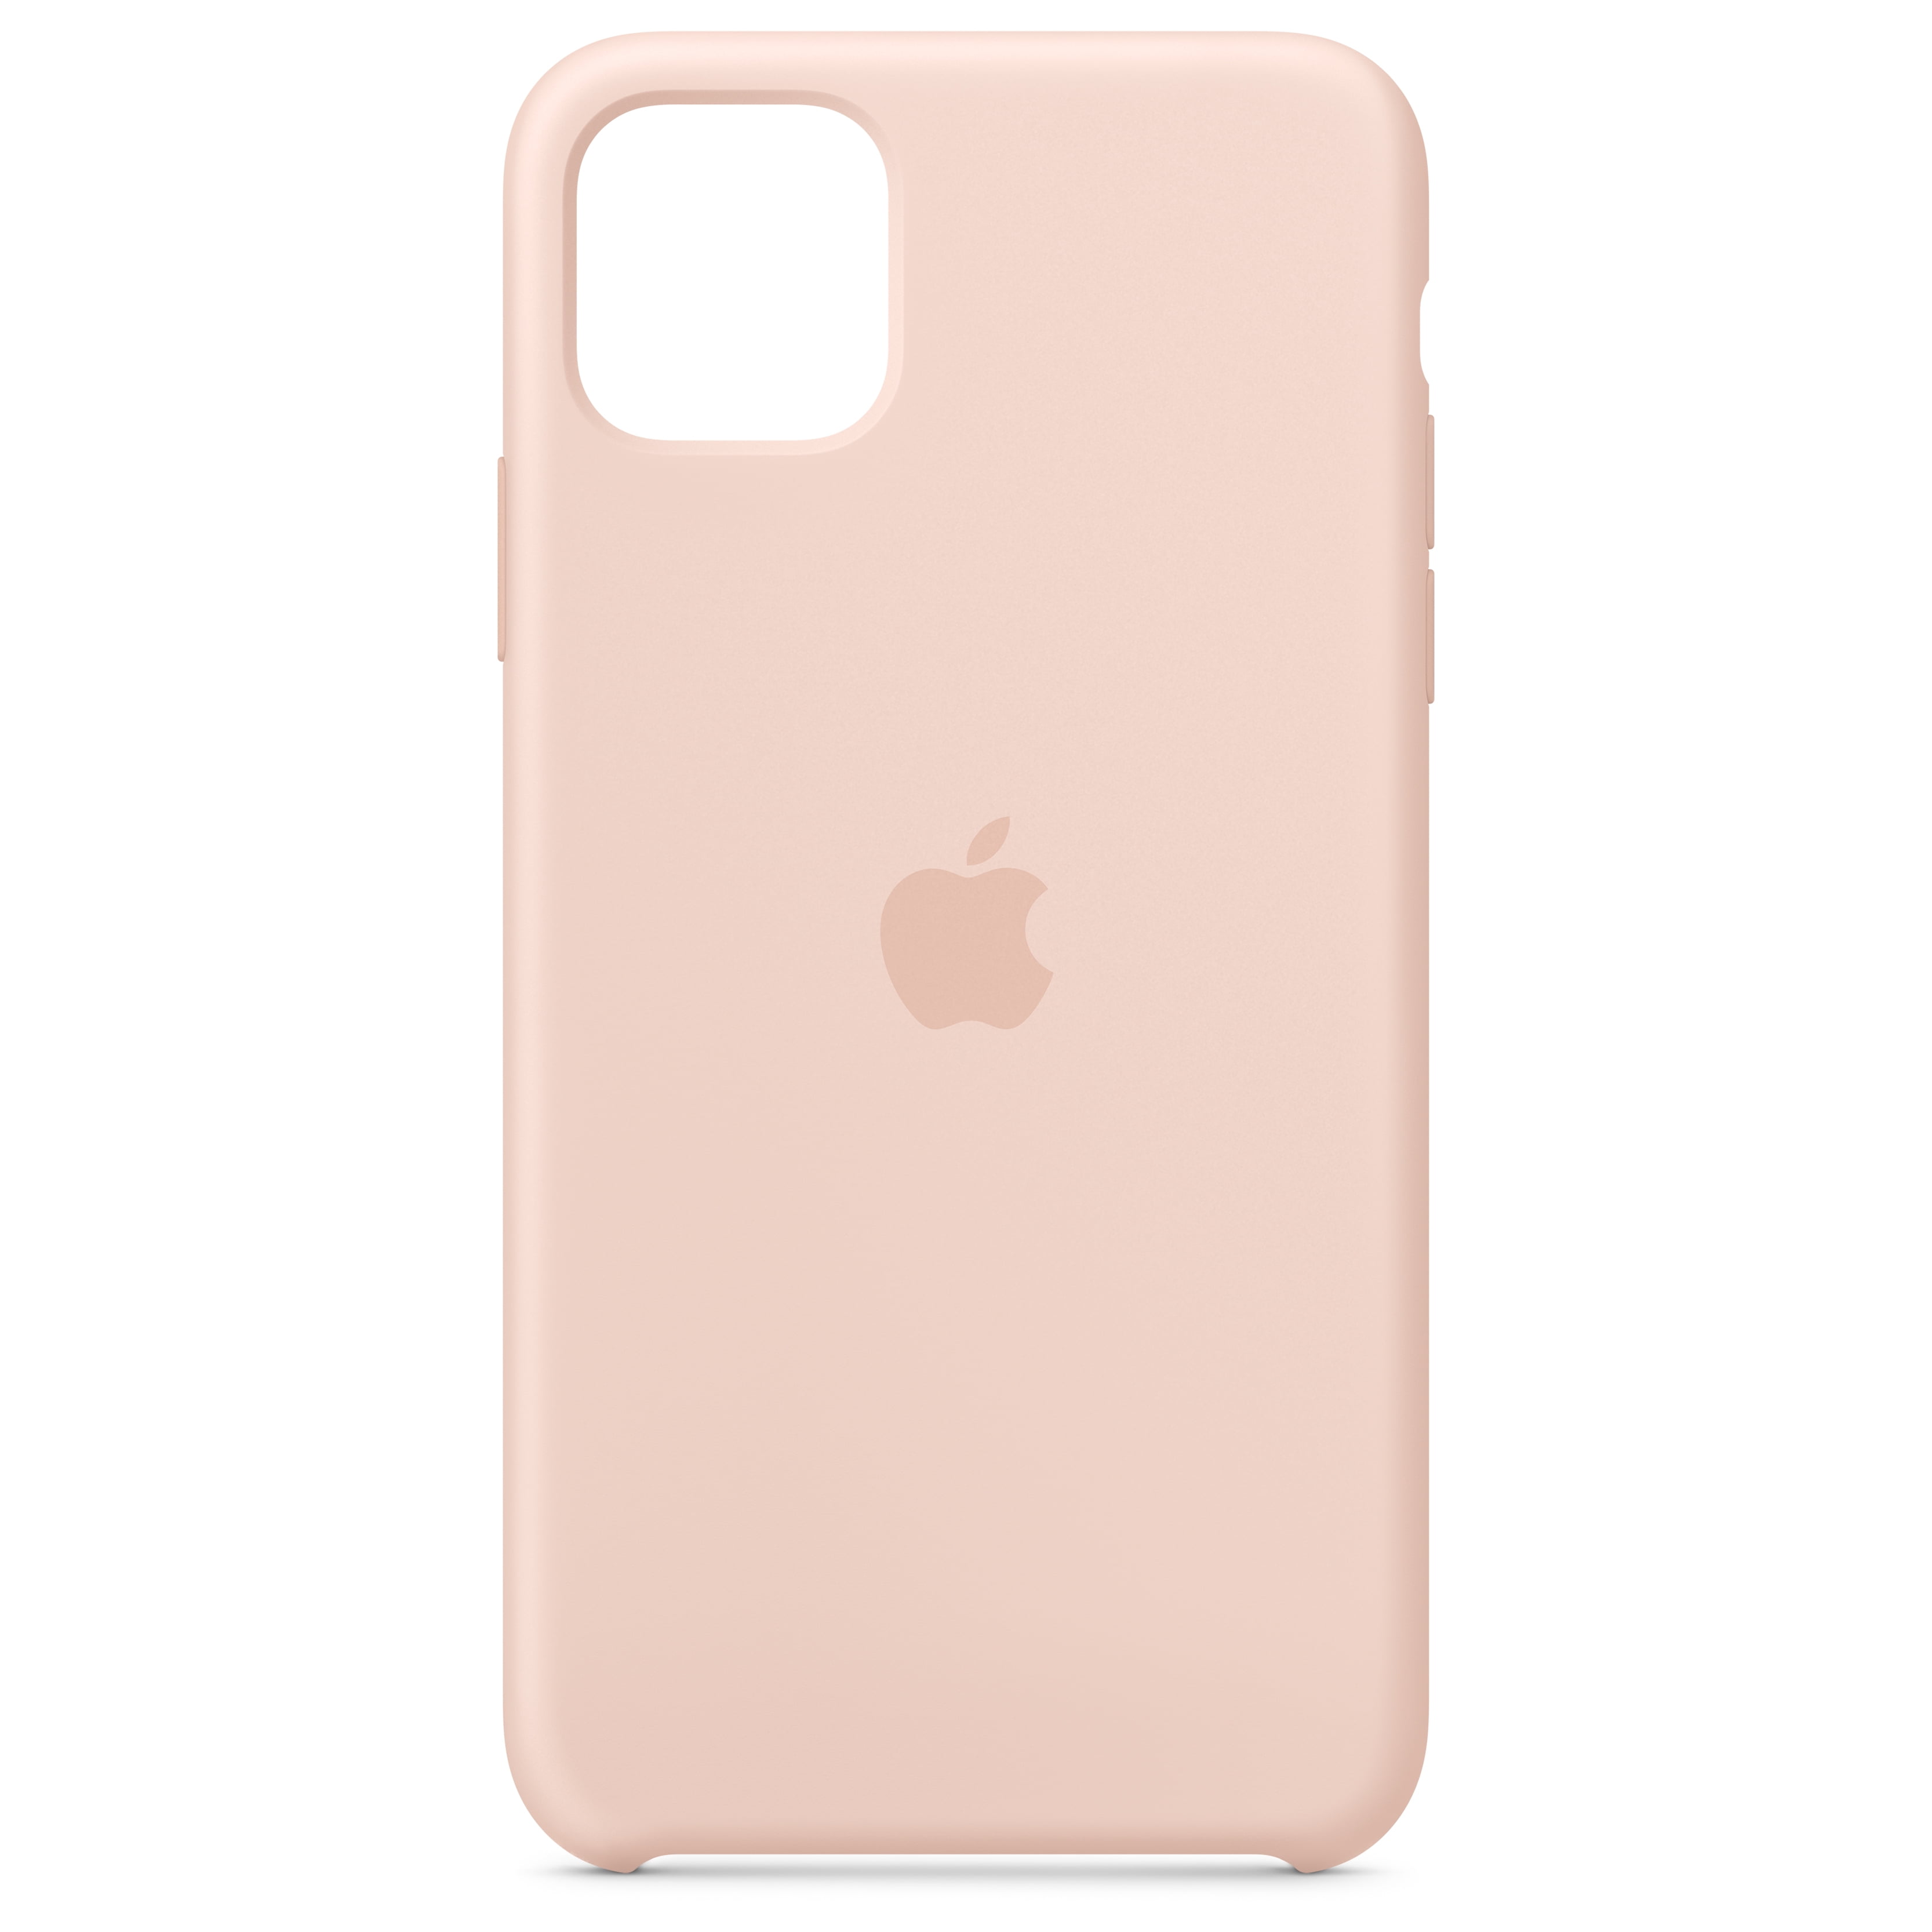 iPhone 11 Pro Max Silicone Case - Pink Sand 